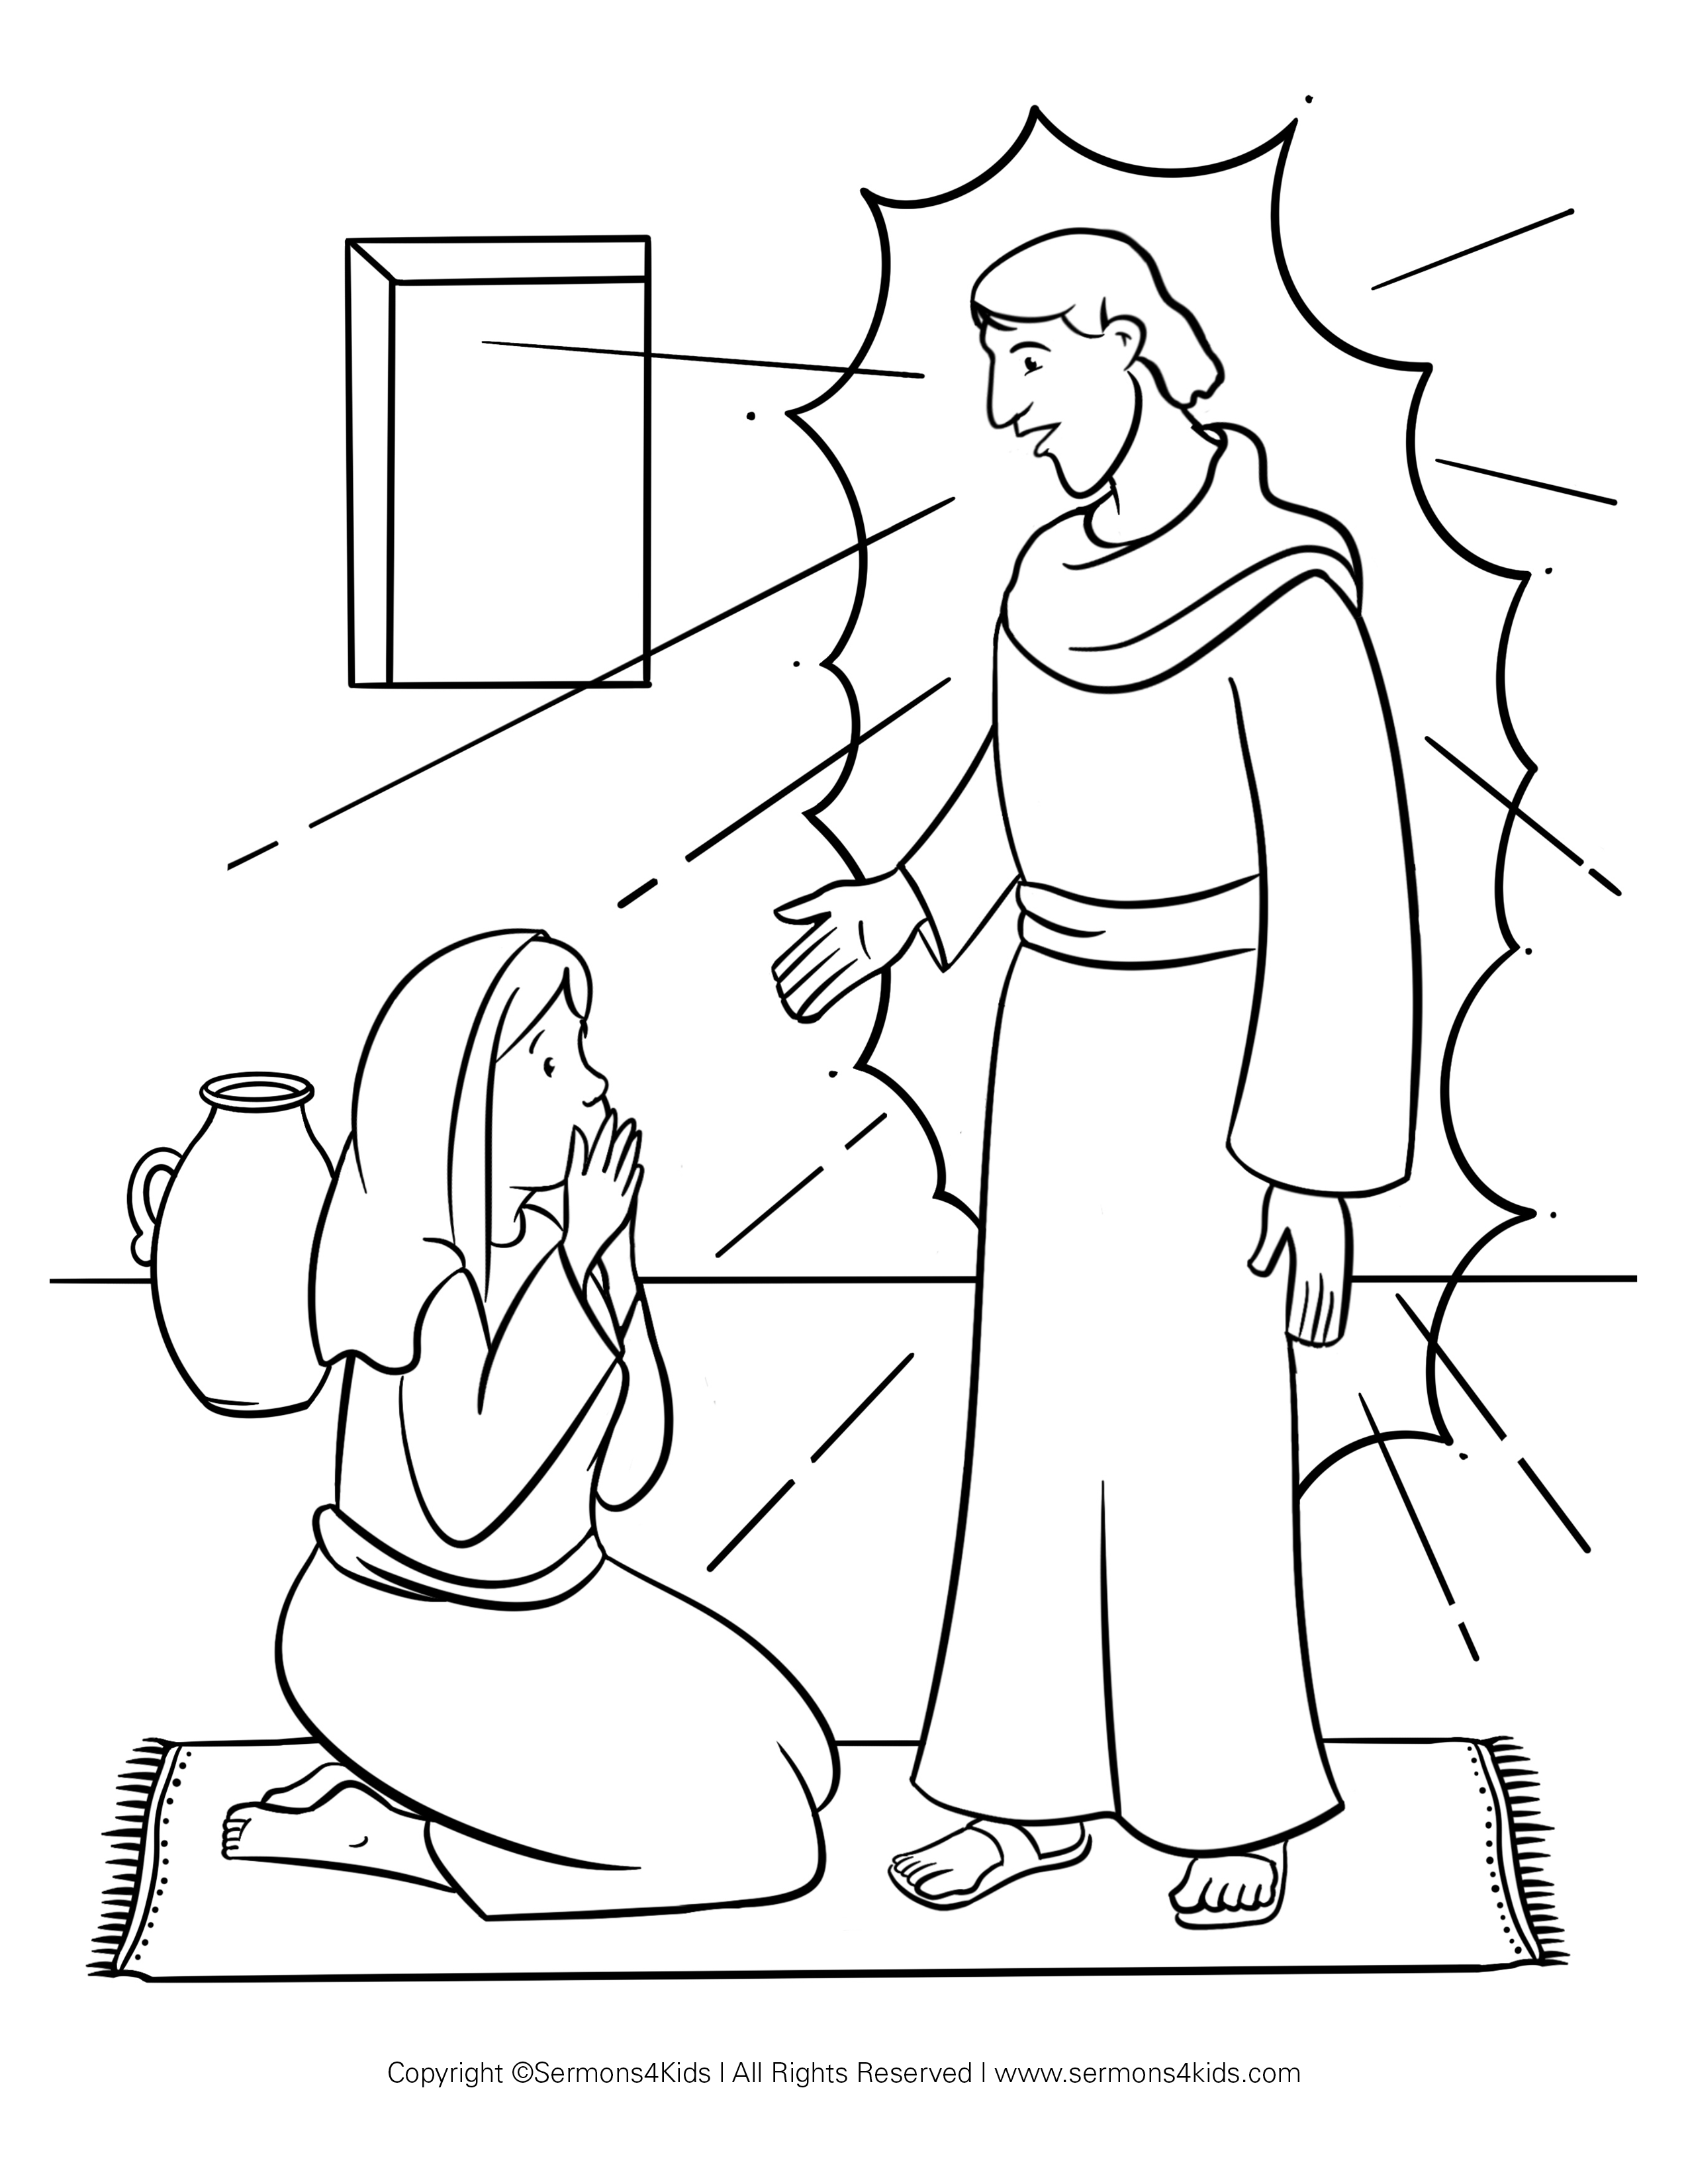 An Angel Appears to Mary #1 Coloring Page | Sermons4Kid...